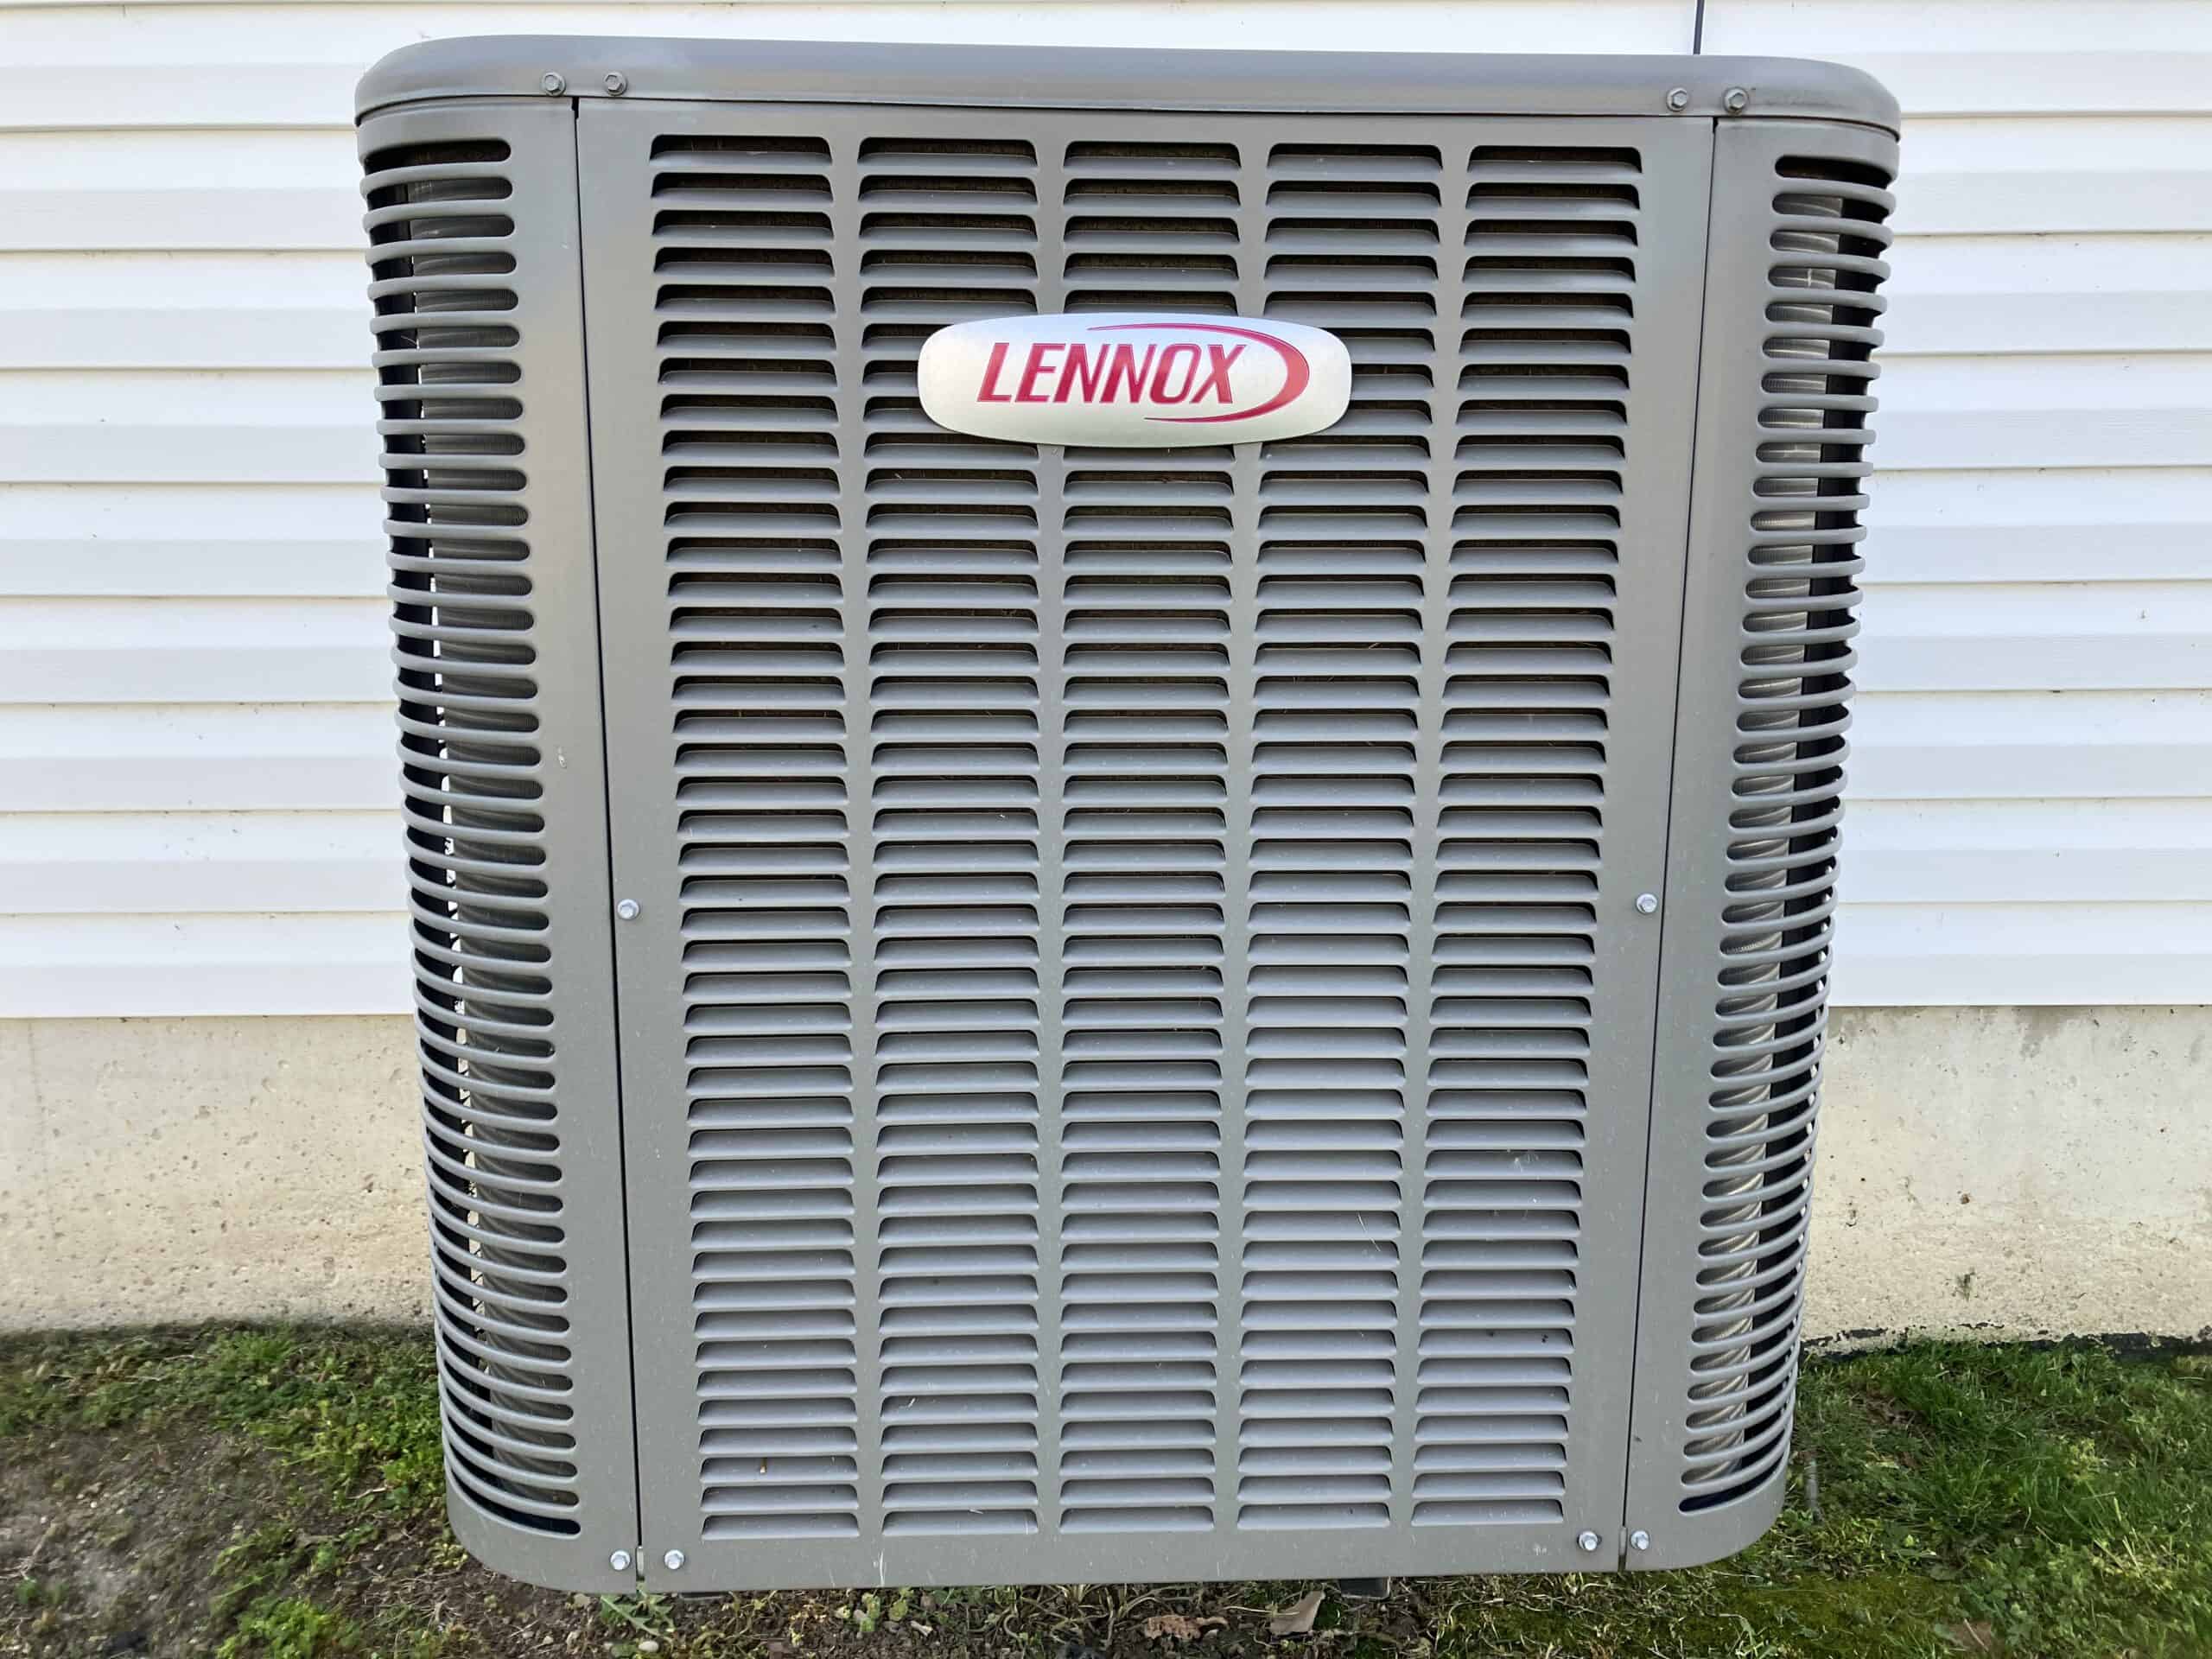 Lennox residential air conditioner